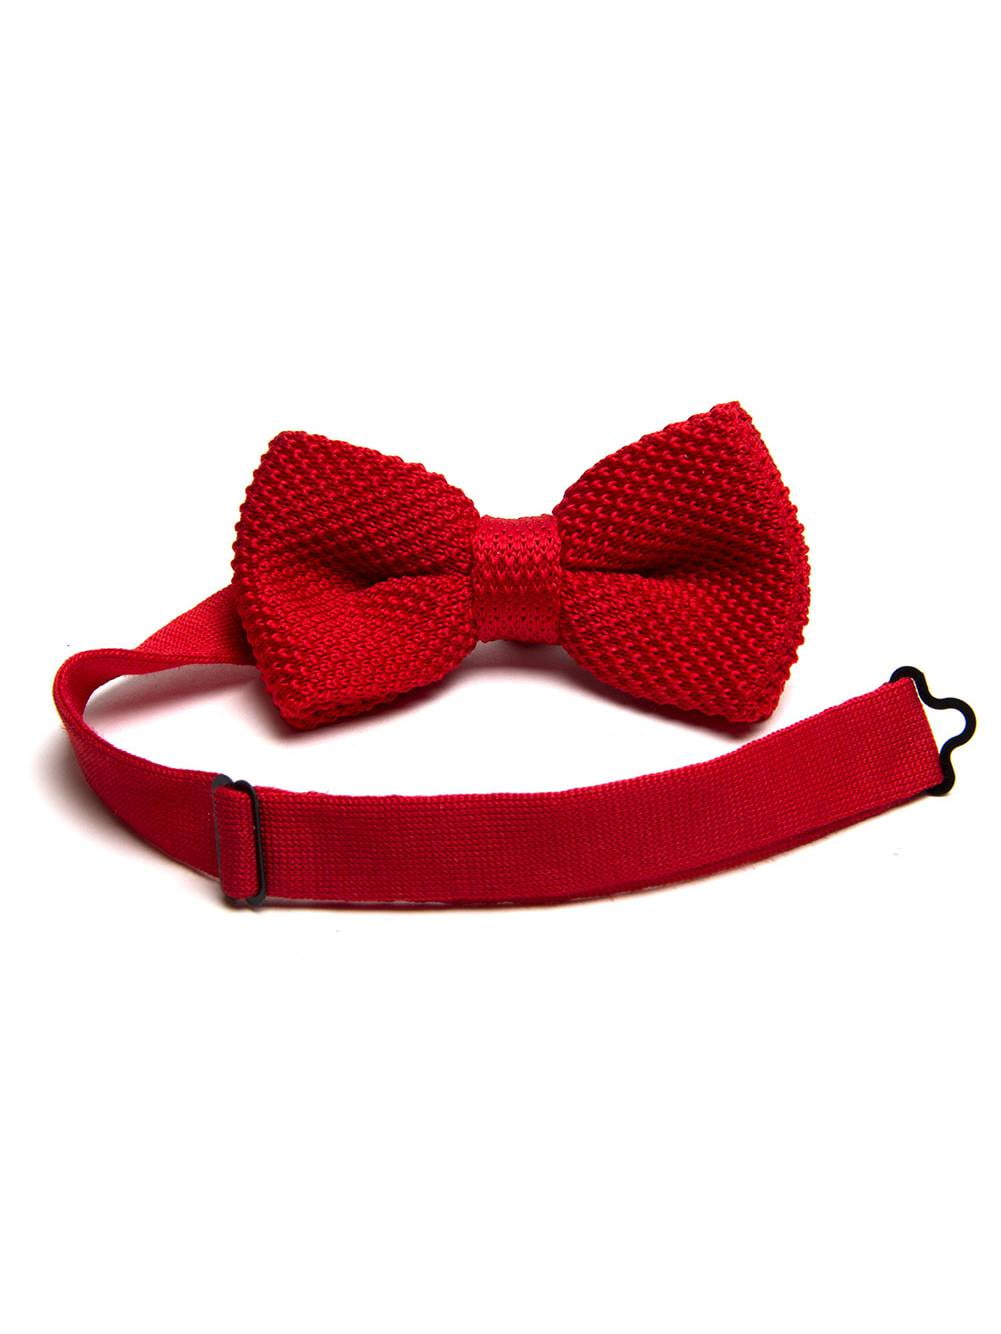 Gravity Threads Sophisticated Fashion Knit Bow Ties, Red - Walmart.com